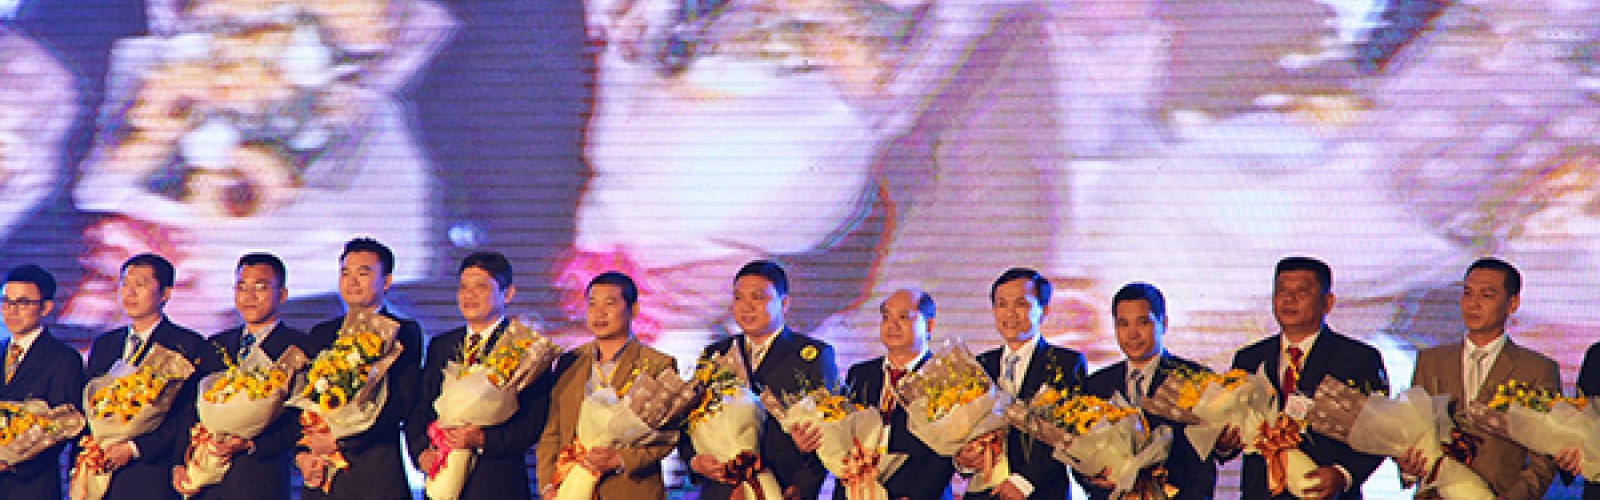 For the third time in a row, Dalat Hasfarm achieved High Quality Vietnamese Goods Awards